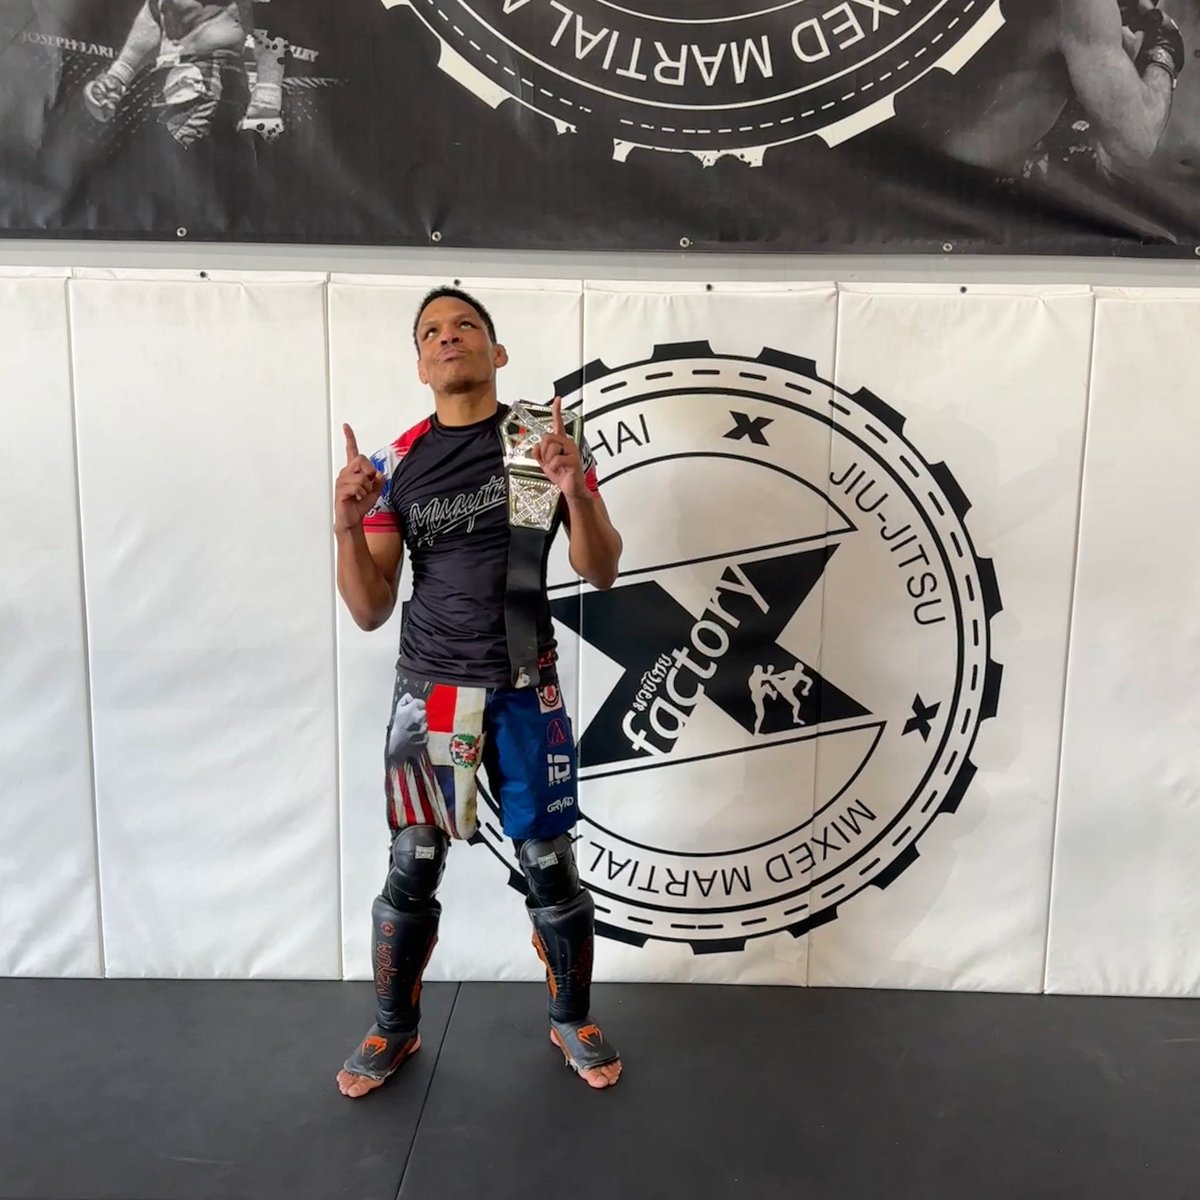 🏆 CHAMP This week’s FX Sparring Champ is @JohnDeJesusMMA 🏆 #andnewwwwwwww Will he retain his belt next week?! Stay tuned… #FactoryX #Xonthechest